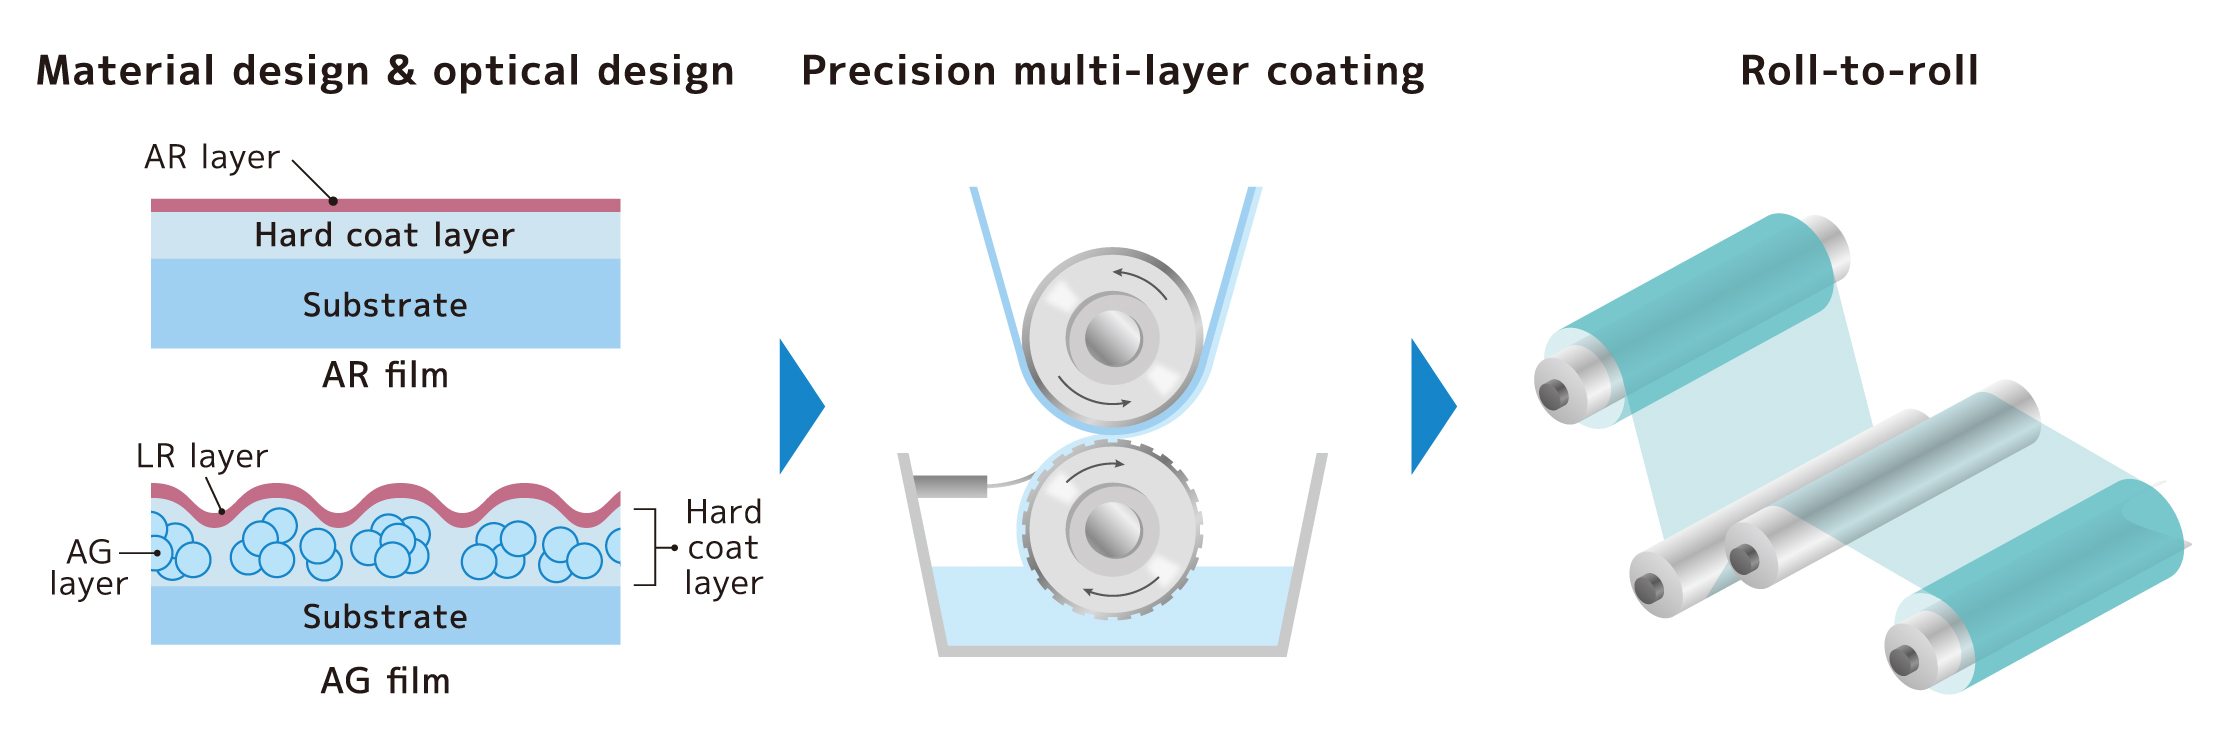 Manufacturing technology that can control film thickness